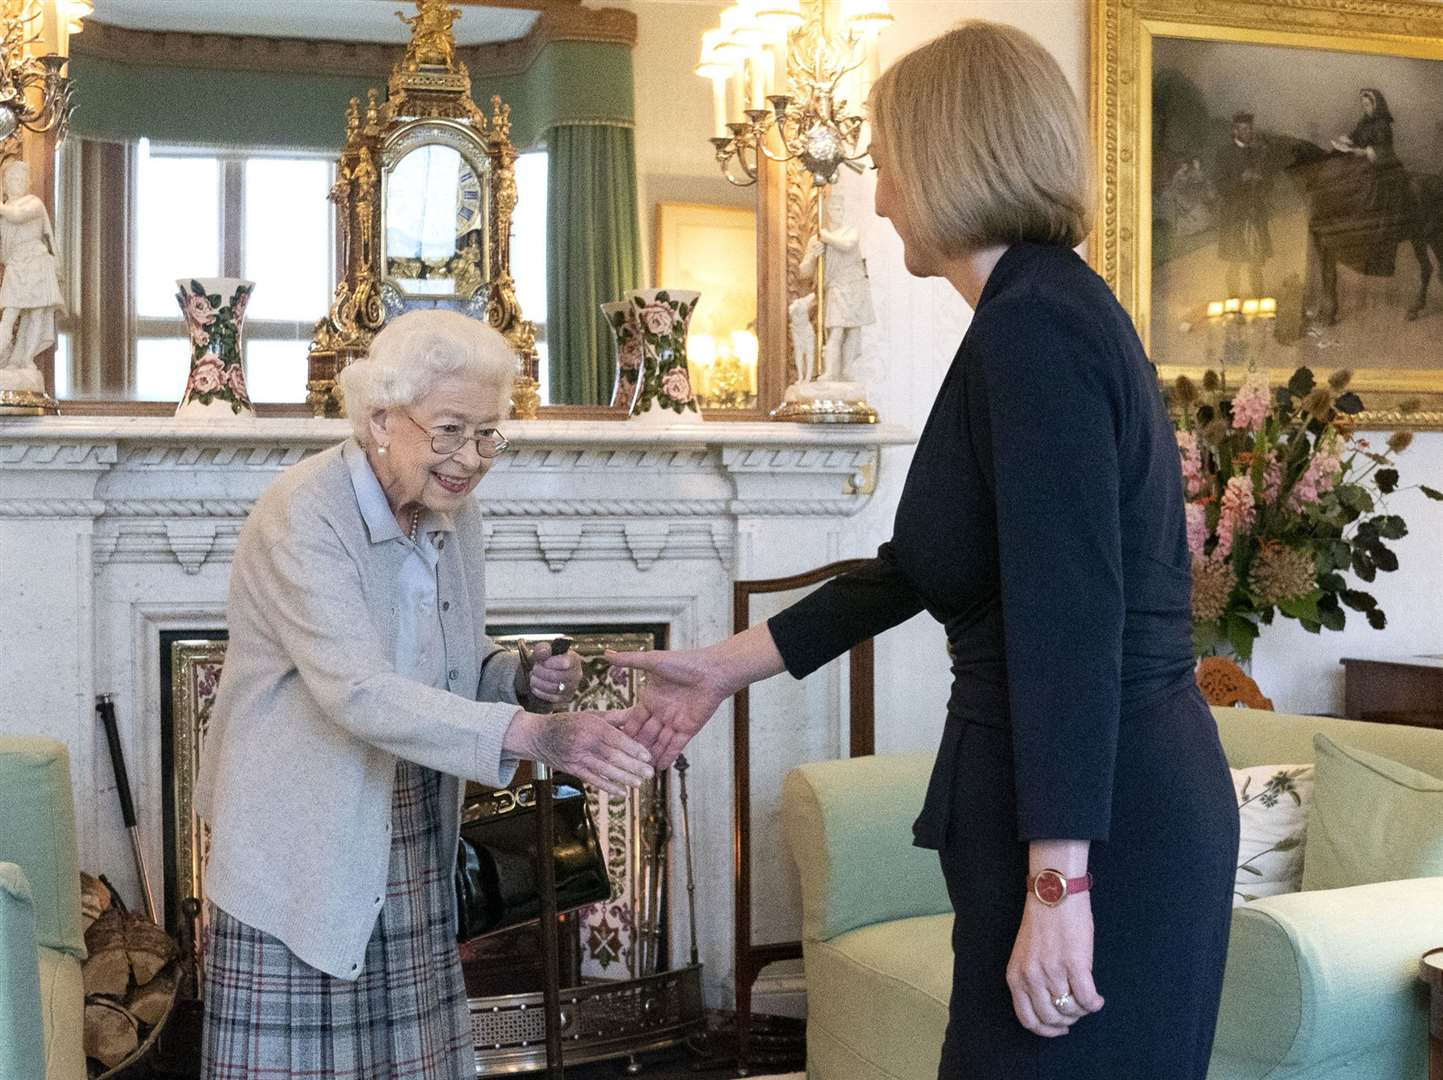 Queen Elizabeth II welcomes Liz Truss at Balmoral where she invited the newly elected leader of the Conservative Party to become prime minister and form a new government (Jane Barlow/PA)